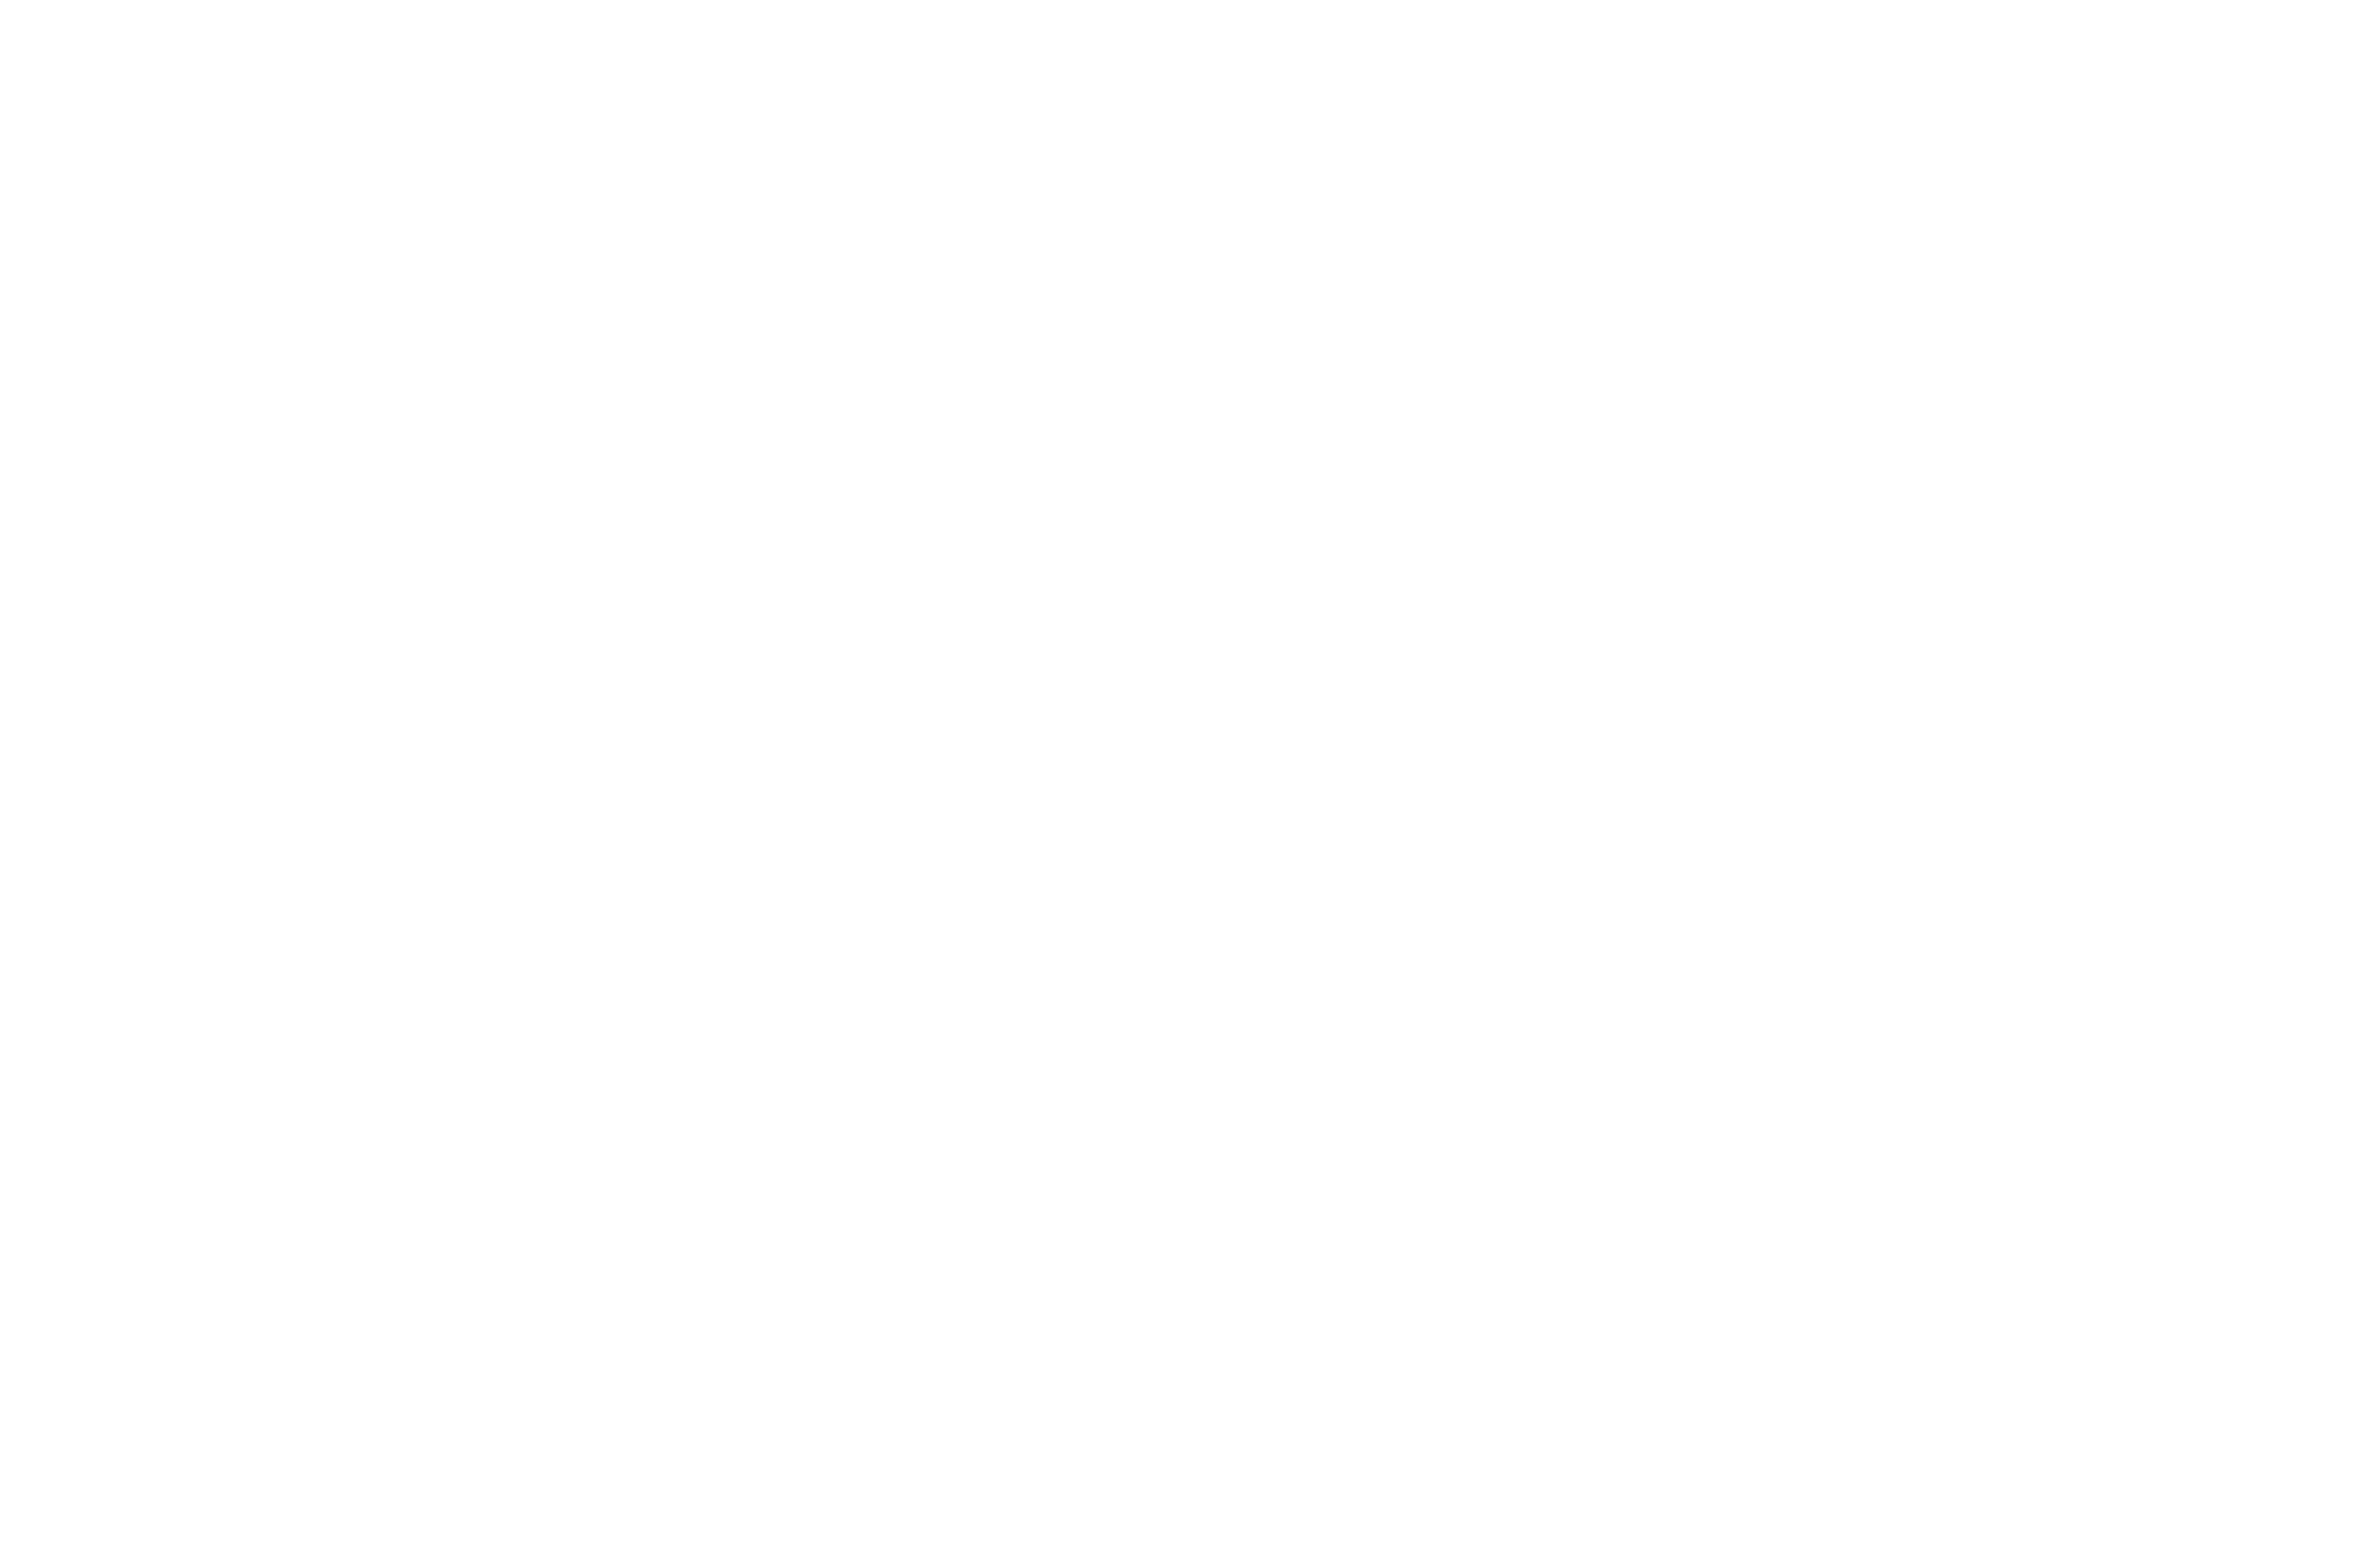 OFFICIALSELECTION-ProdigyFilmFestival-2019 copy.png